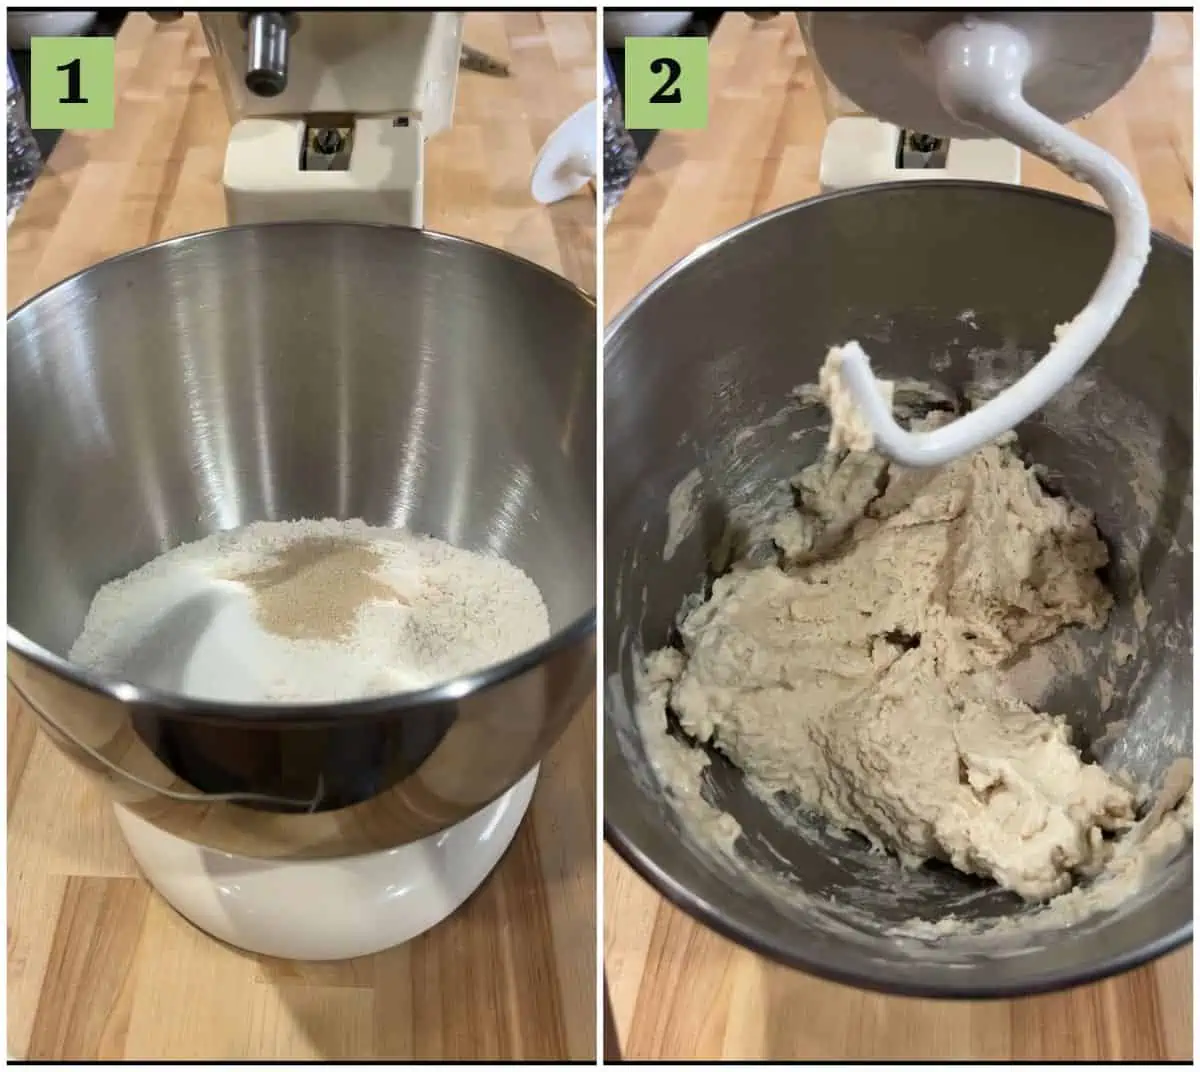 Making dough for Bialys in a kitchenaid stand mixer.